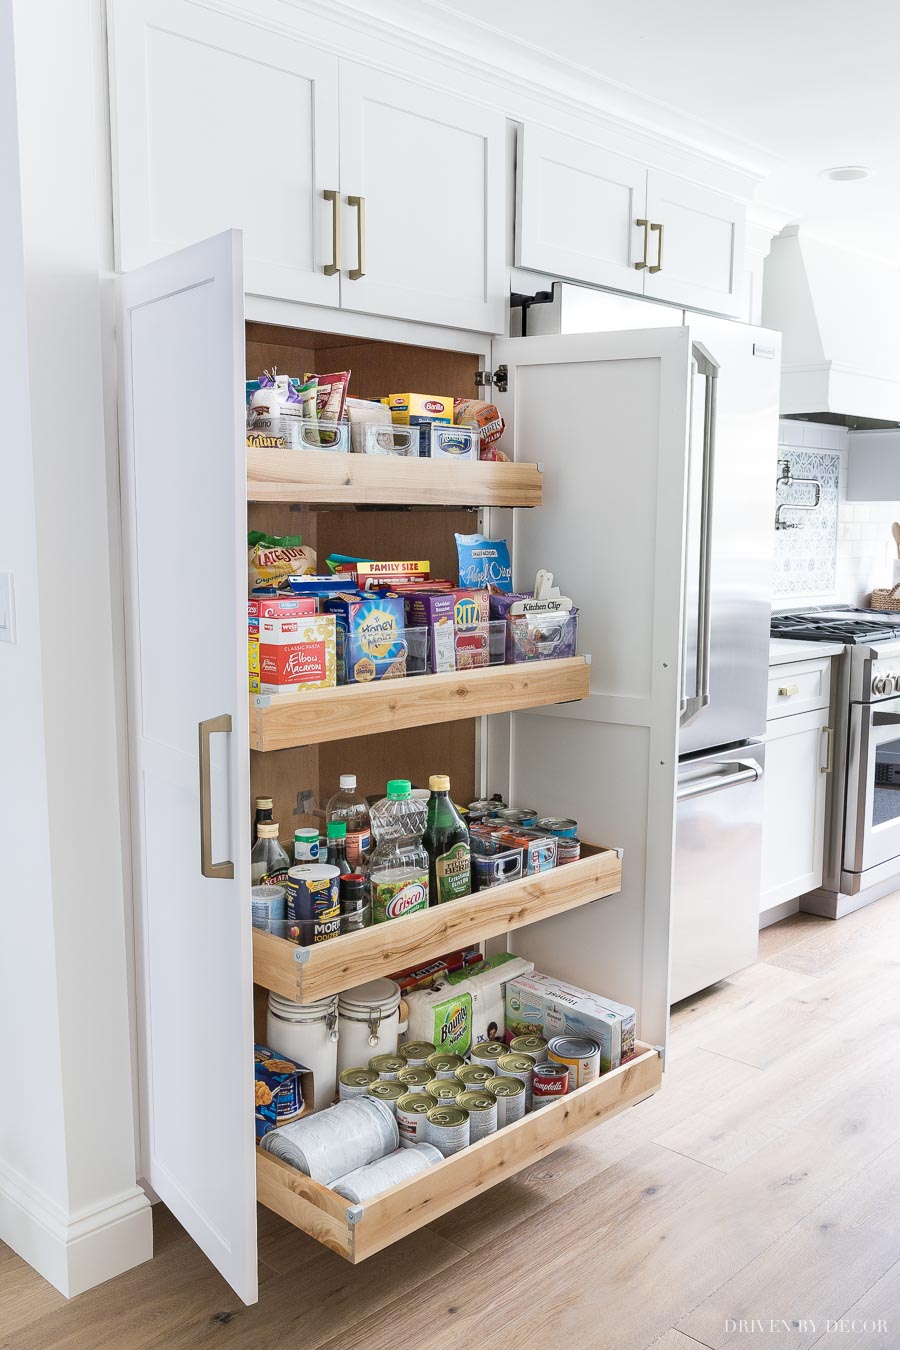 Dream pantry! Wide pantry with roll out shelves for tons of storage plus you can see everything (even stuff in the back!)